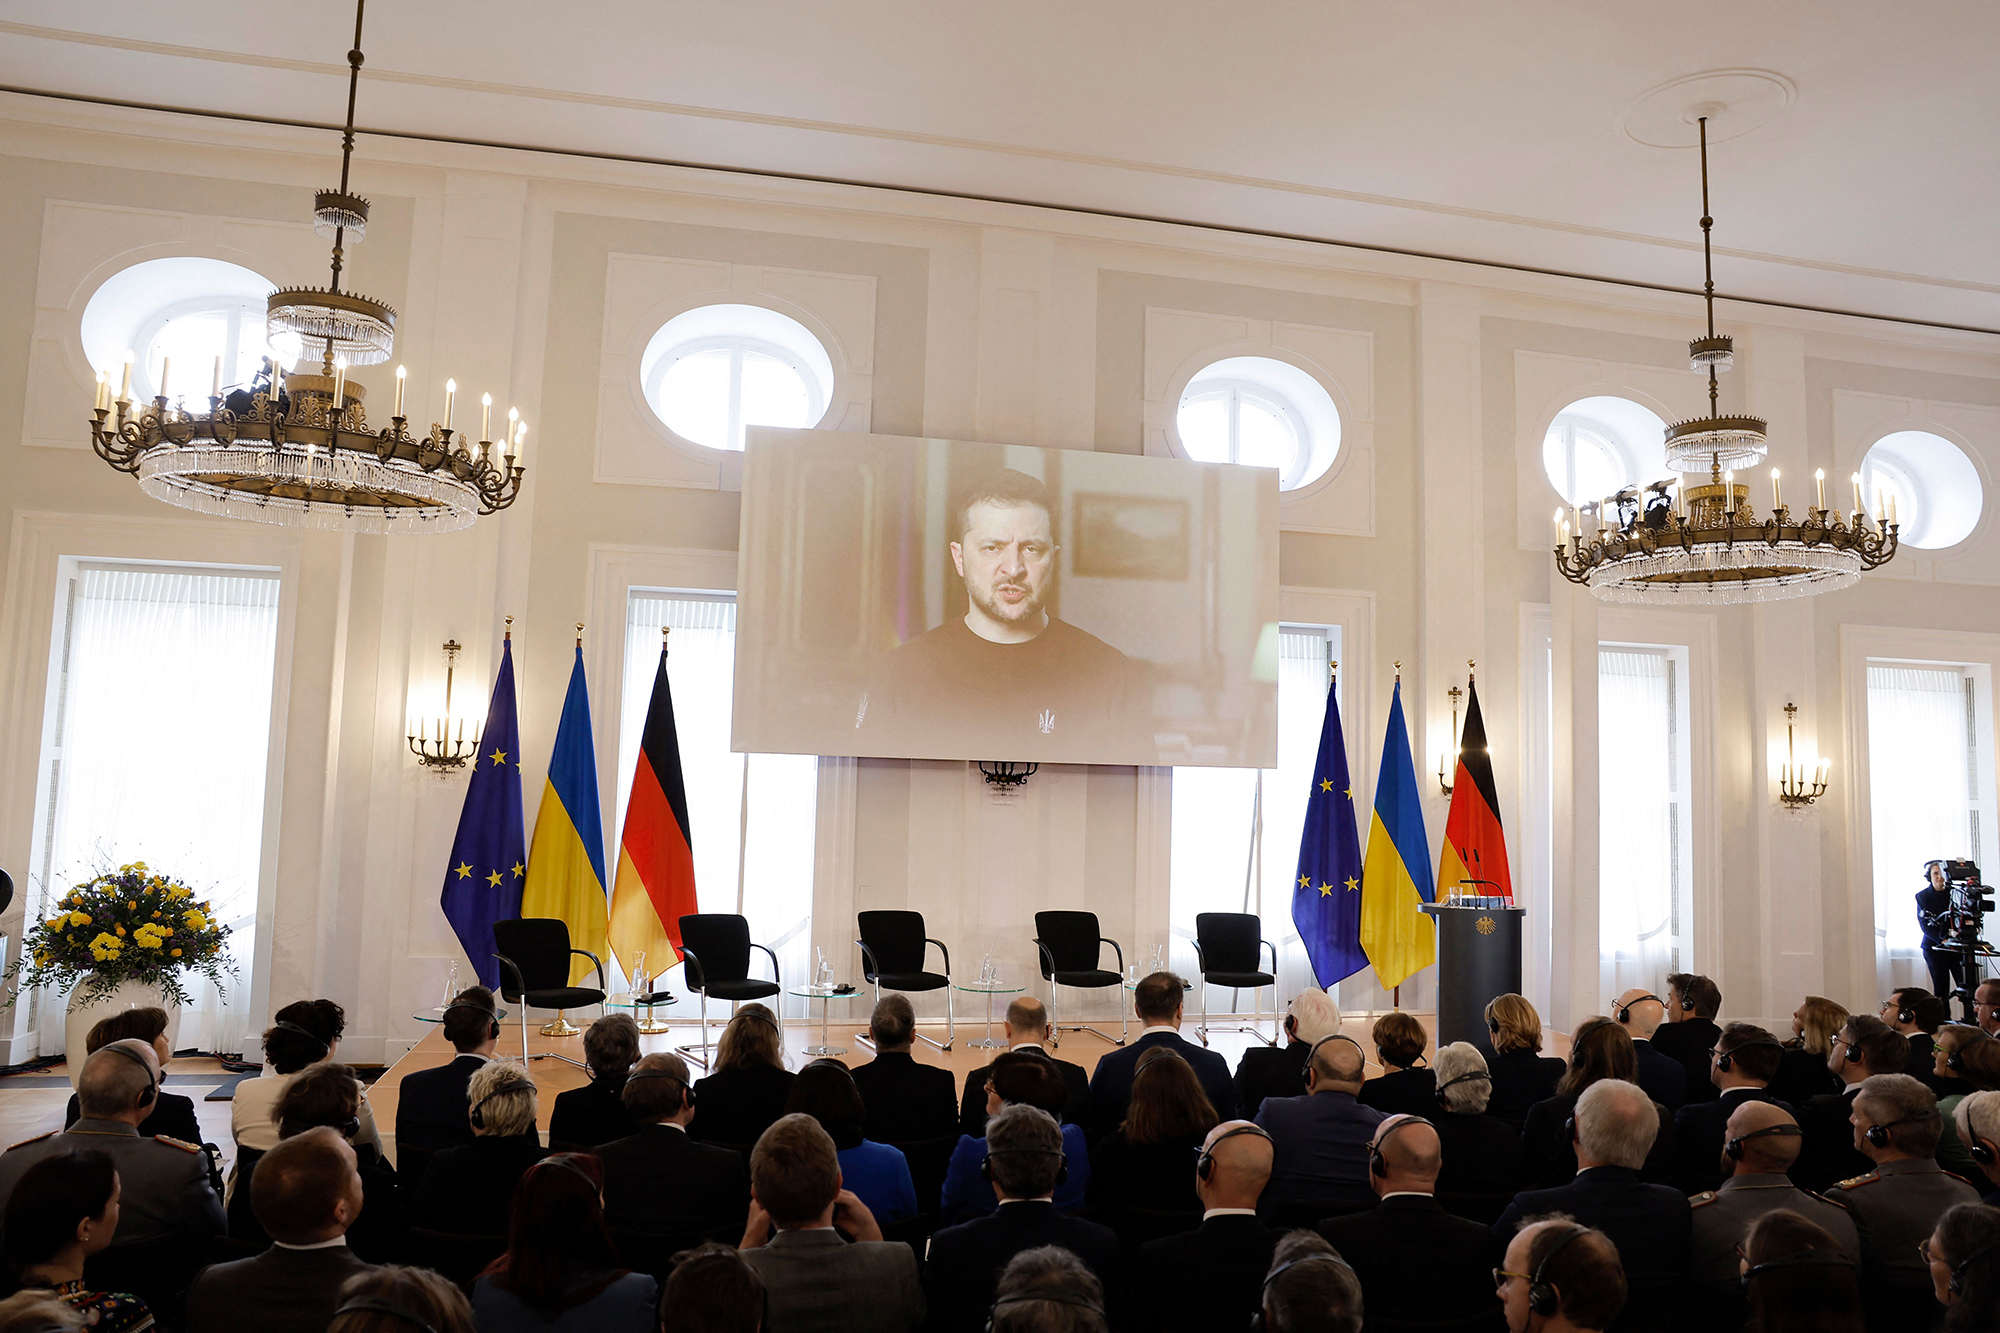 Ukrainian President Volodymyr Zelensky is seen on a screen as he addresses guests during a commemoration event on February 24, at the presidential Bellevue Palace in Berlin, Germany.